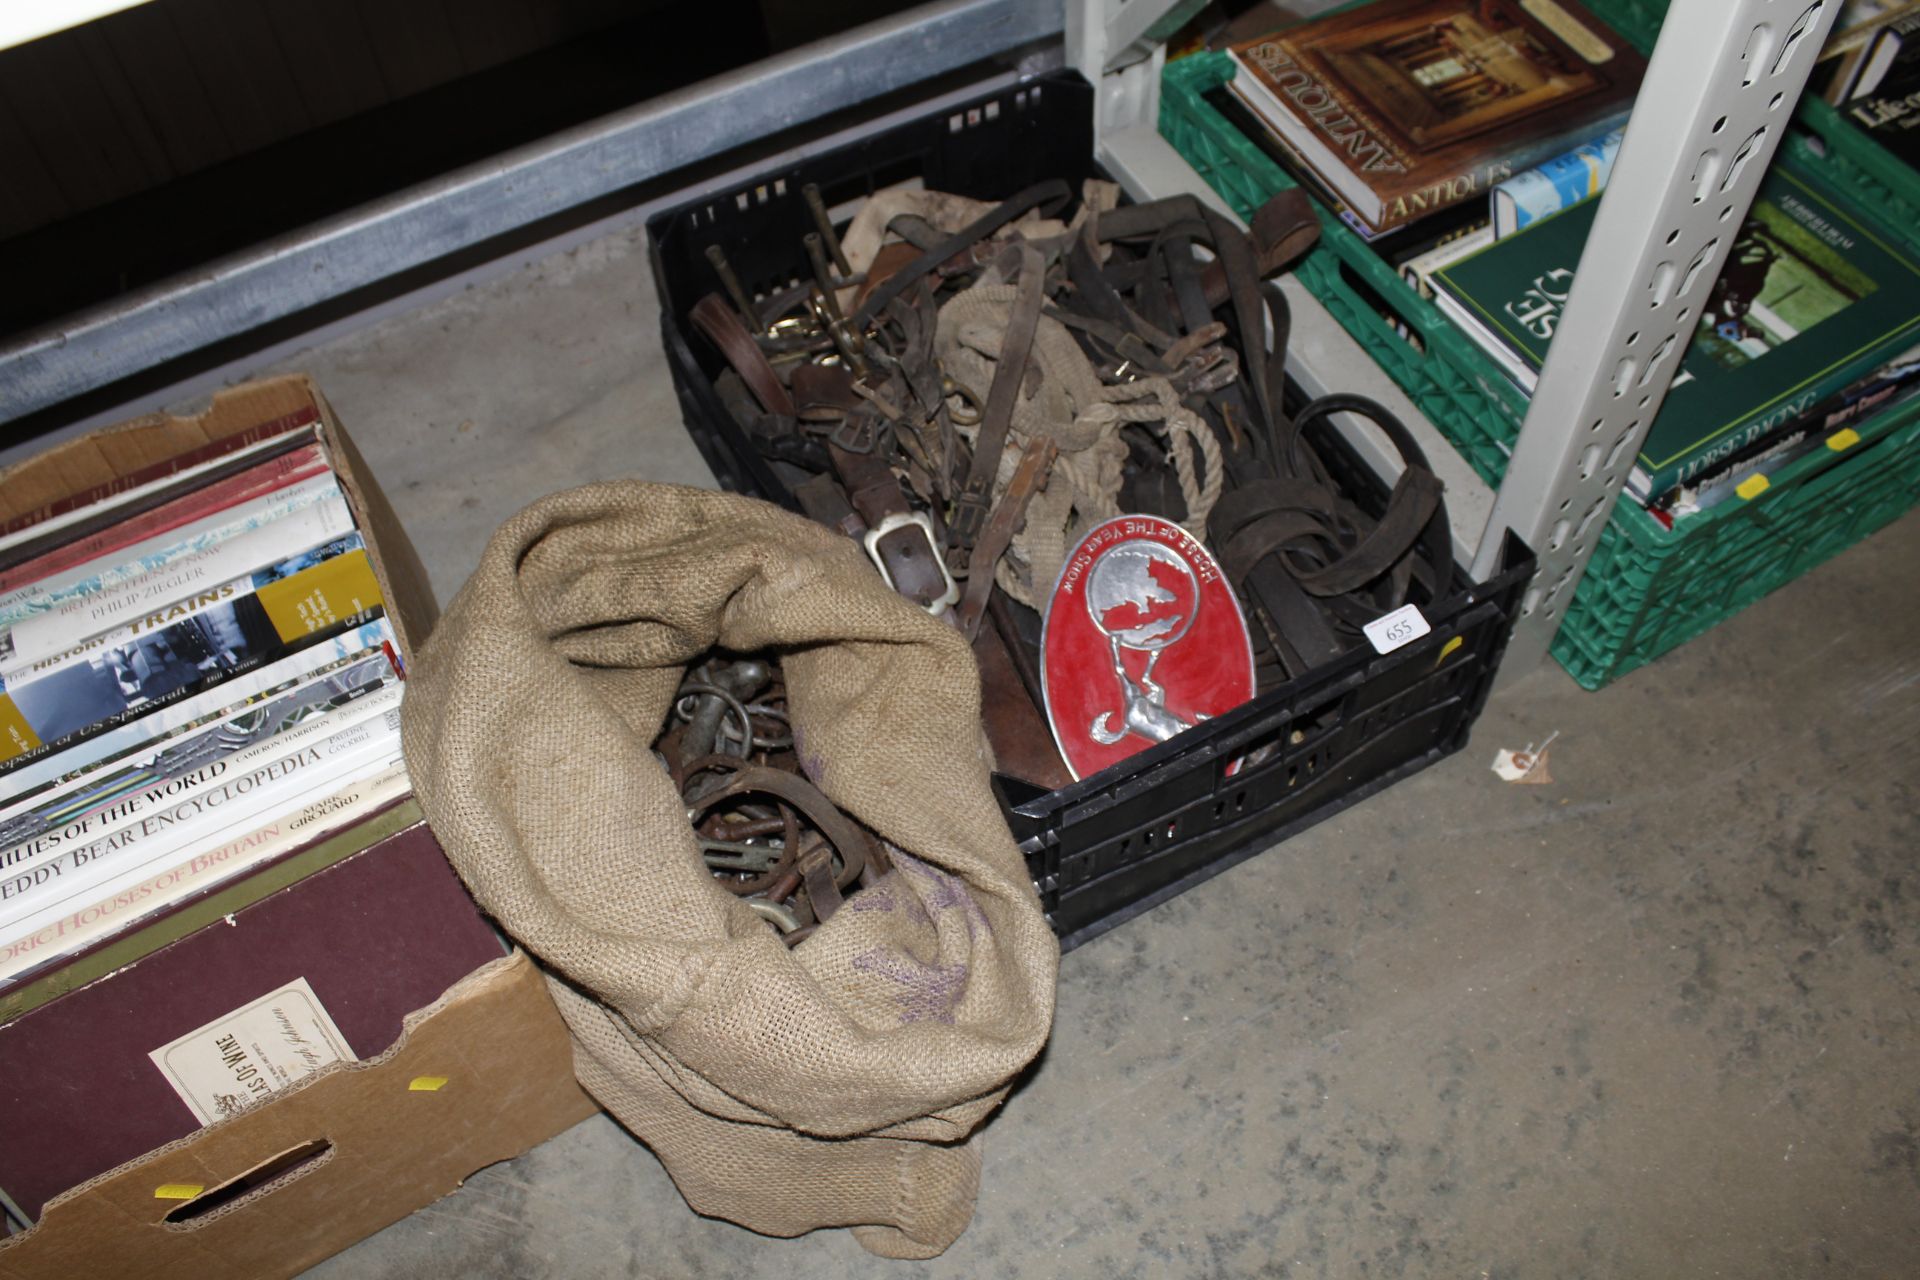 A box and bag of horse harness and Horse of The Ye